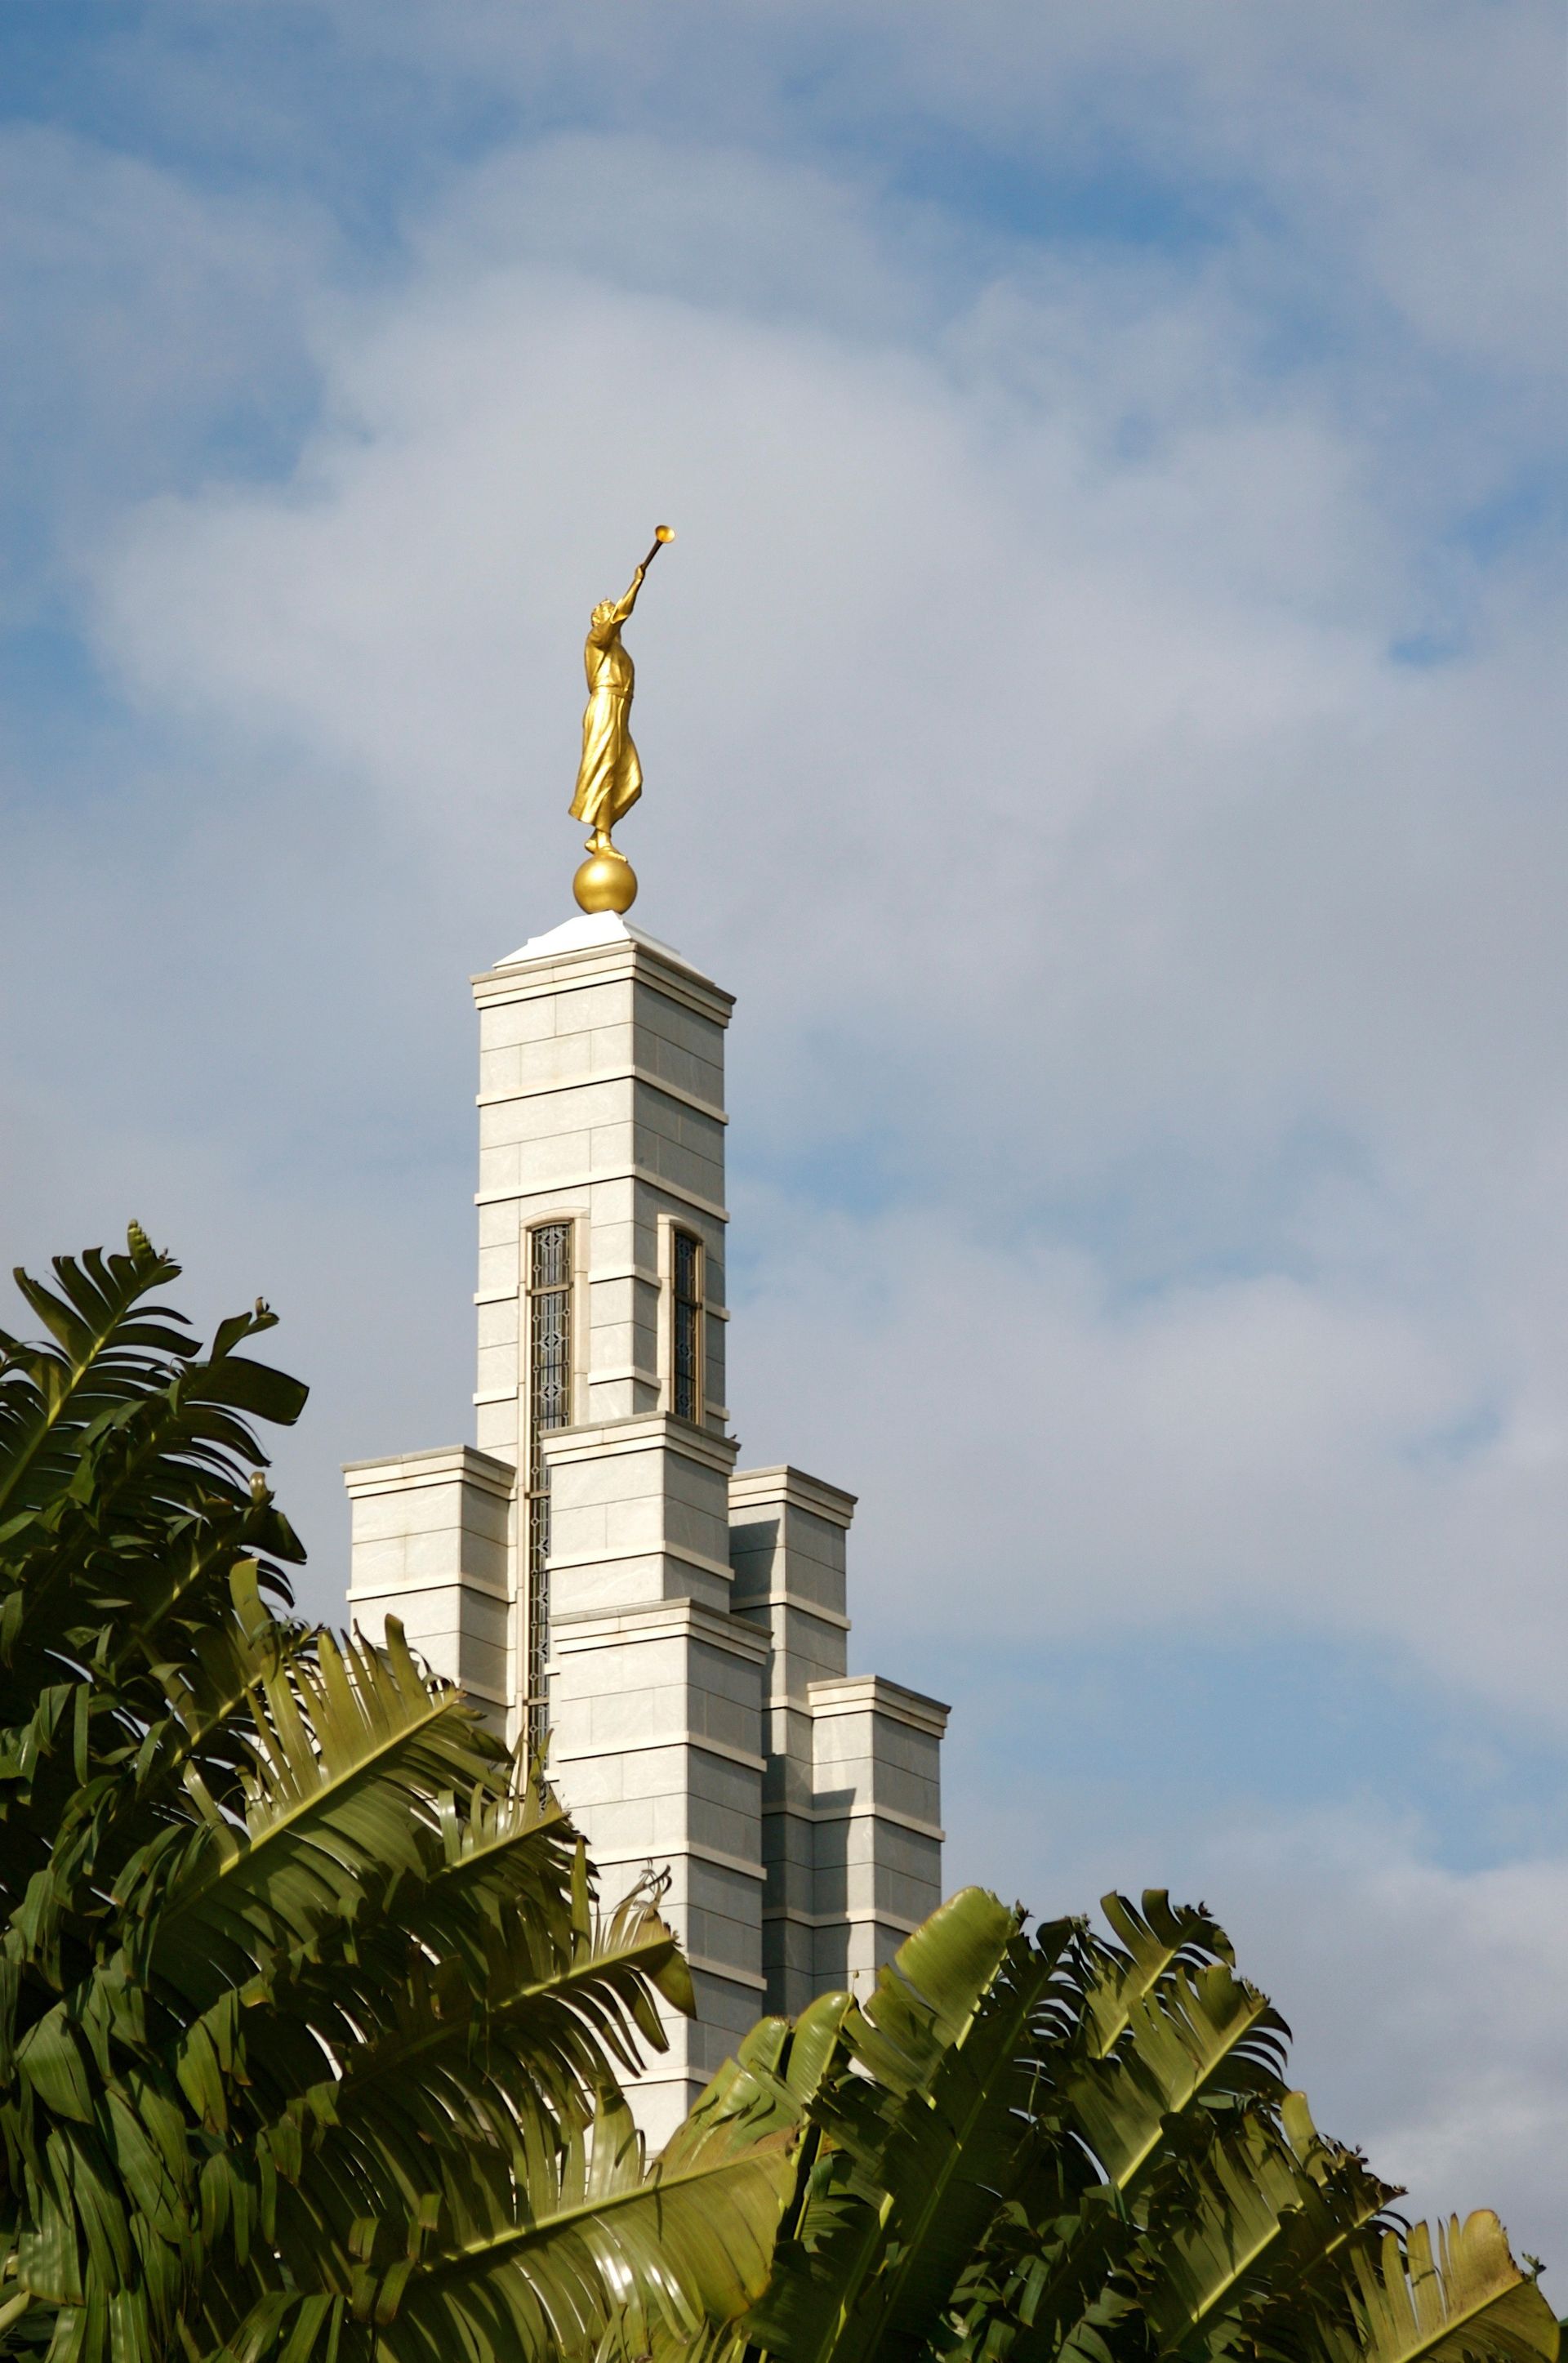 The angel Moroni stands atop the spire of the Accra Ghana Temple.